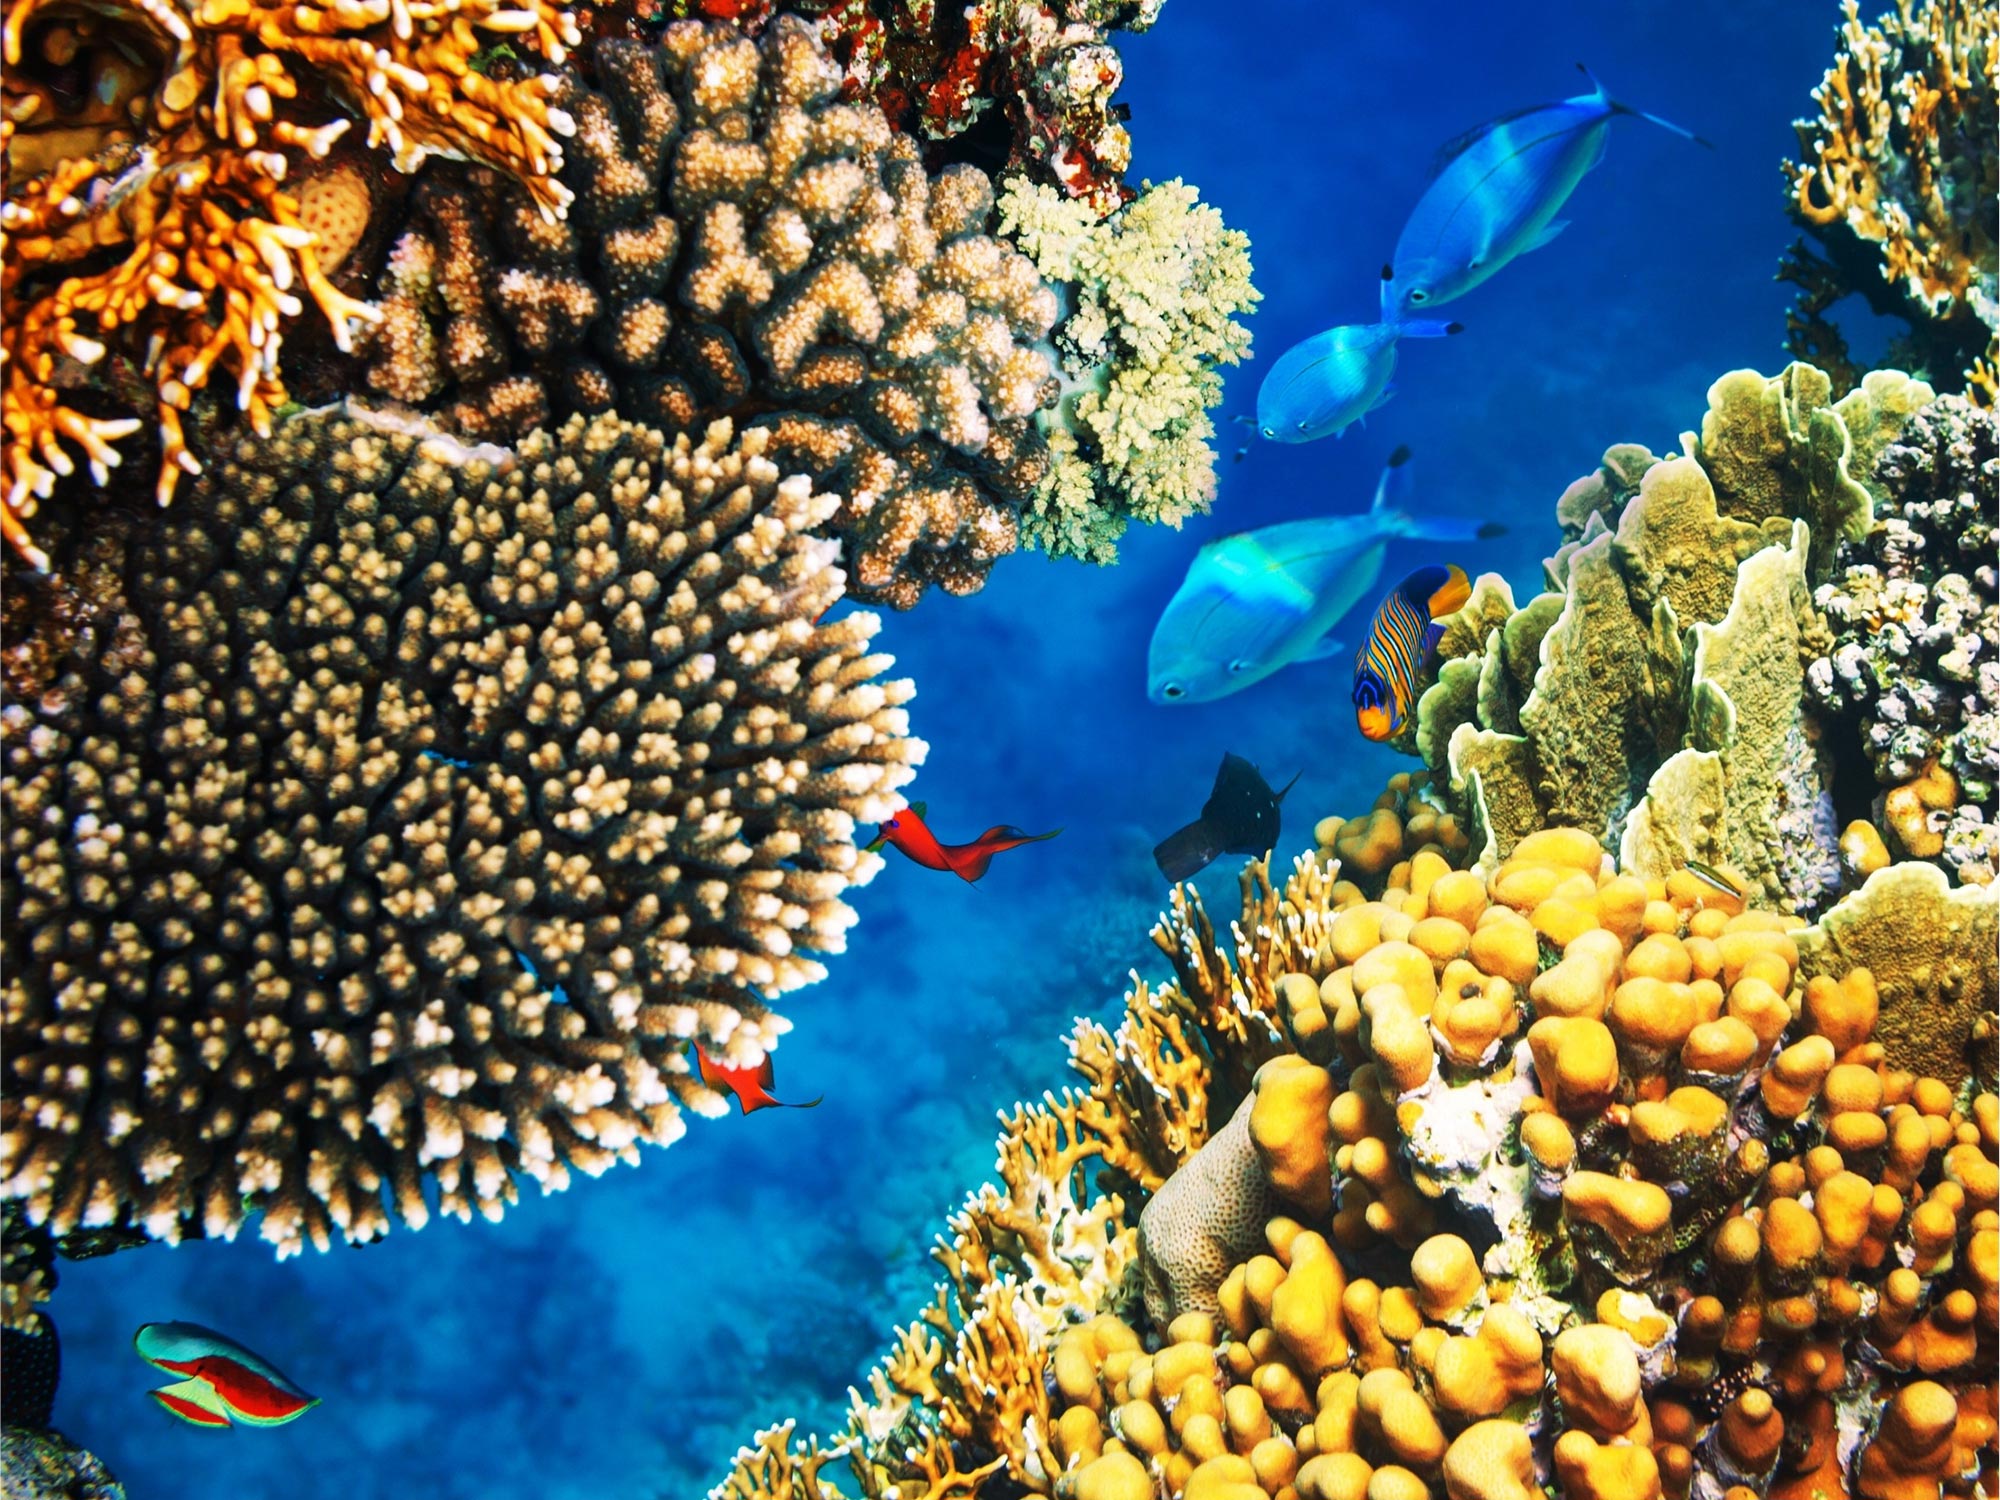 Will Reefs Survive? Biodiversity, Climate Change and the Fate of Coral Reefs